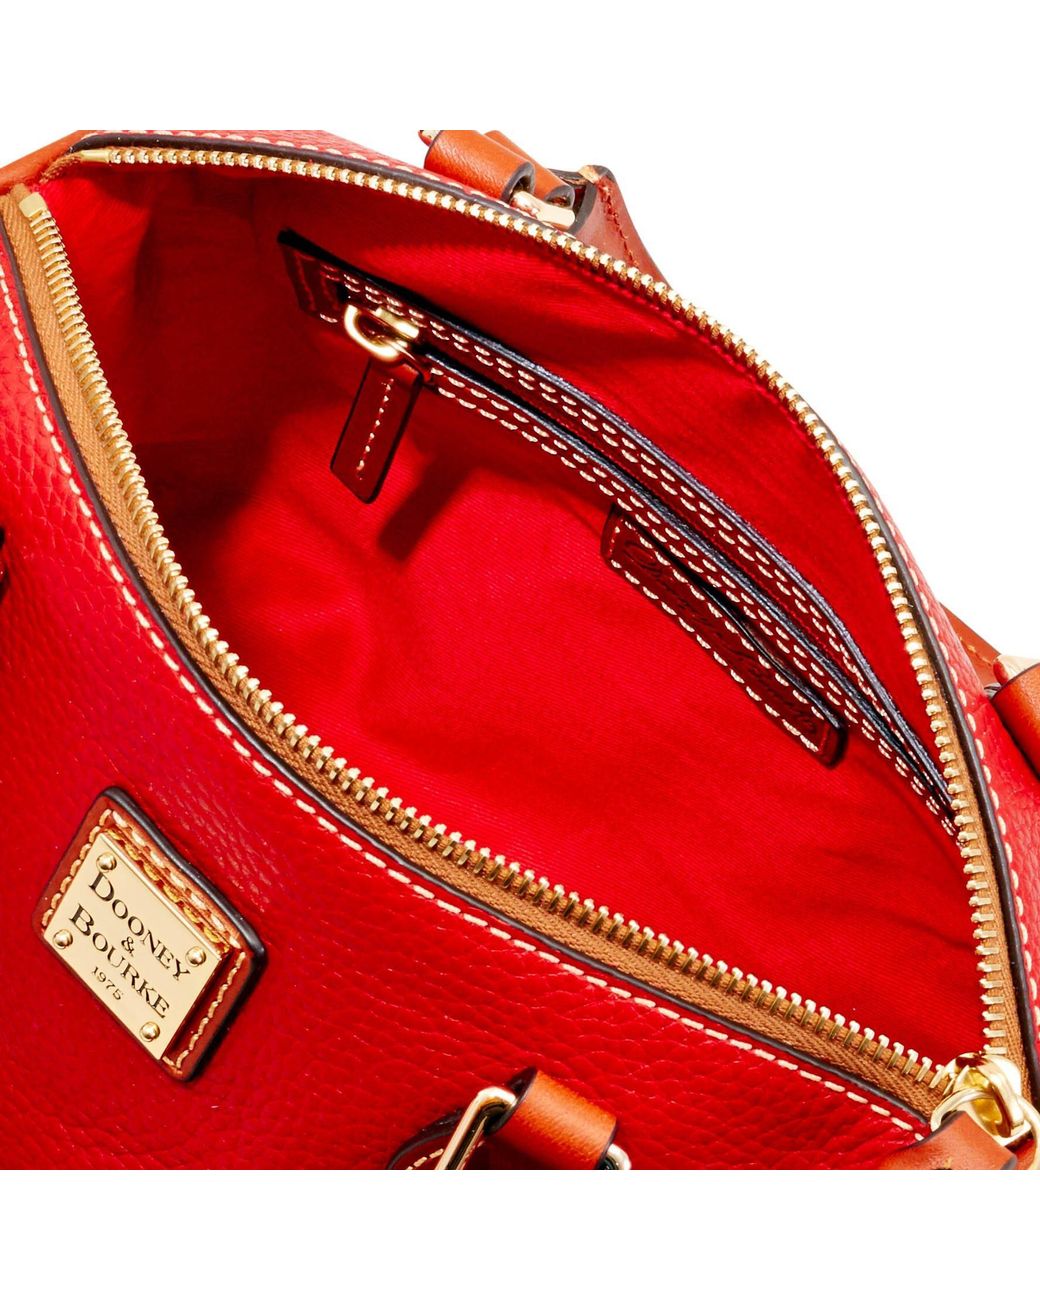 Dooney & Bourke Leather Beacon Collection Slip Tote RED | eBay